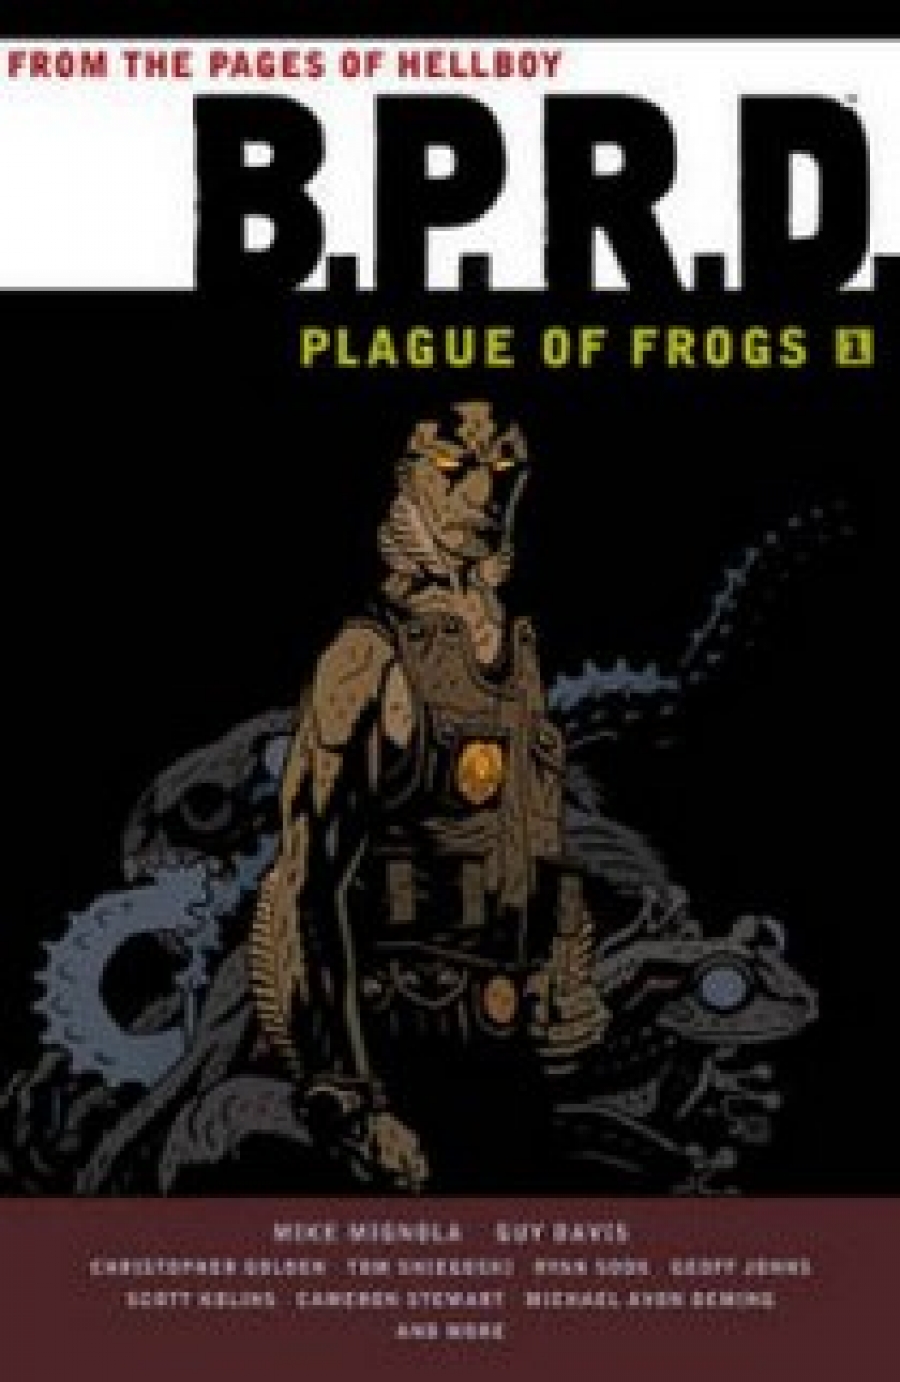 Others, Mignola Mike, Avon Oeming Mike B.P.R.D.: Plague of Frogs Volume 1 Tpb 